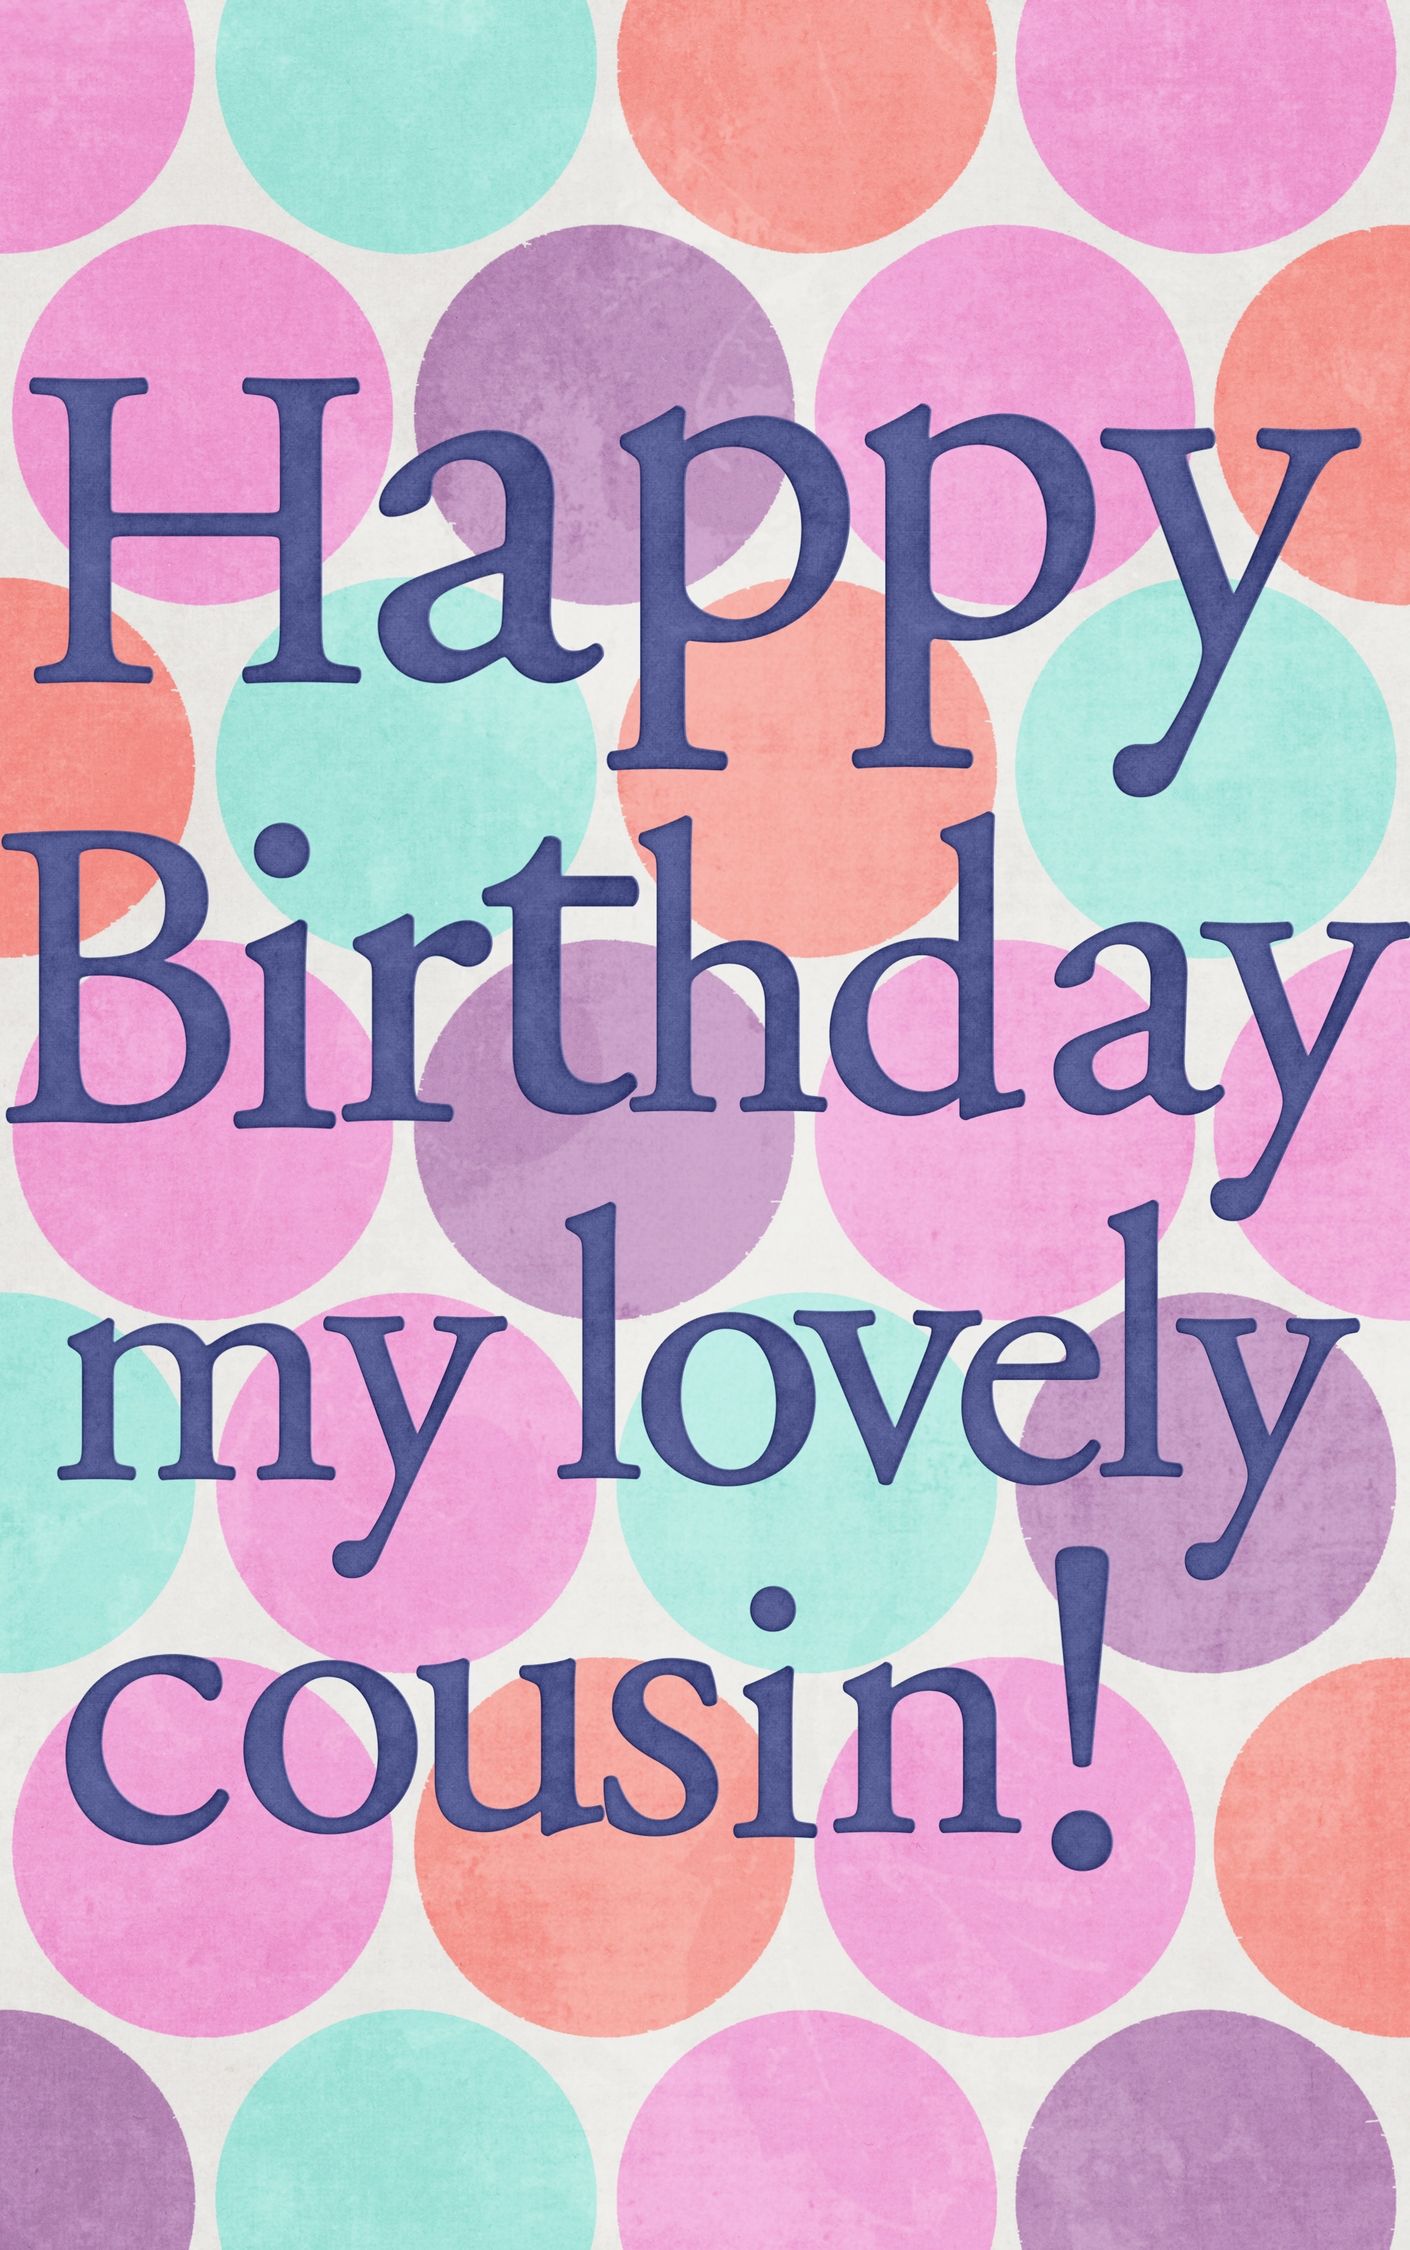 Happy Birthday Little Cousin with regard to Inspiration Ideas Make i. Happy birthday cousin, Happy birthday wishes cousin, Happy birthday cousin female